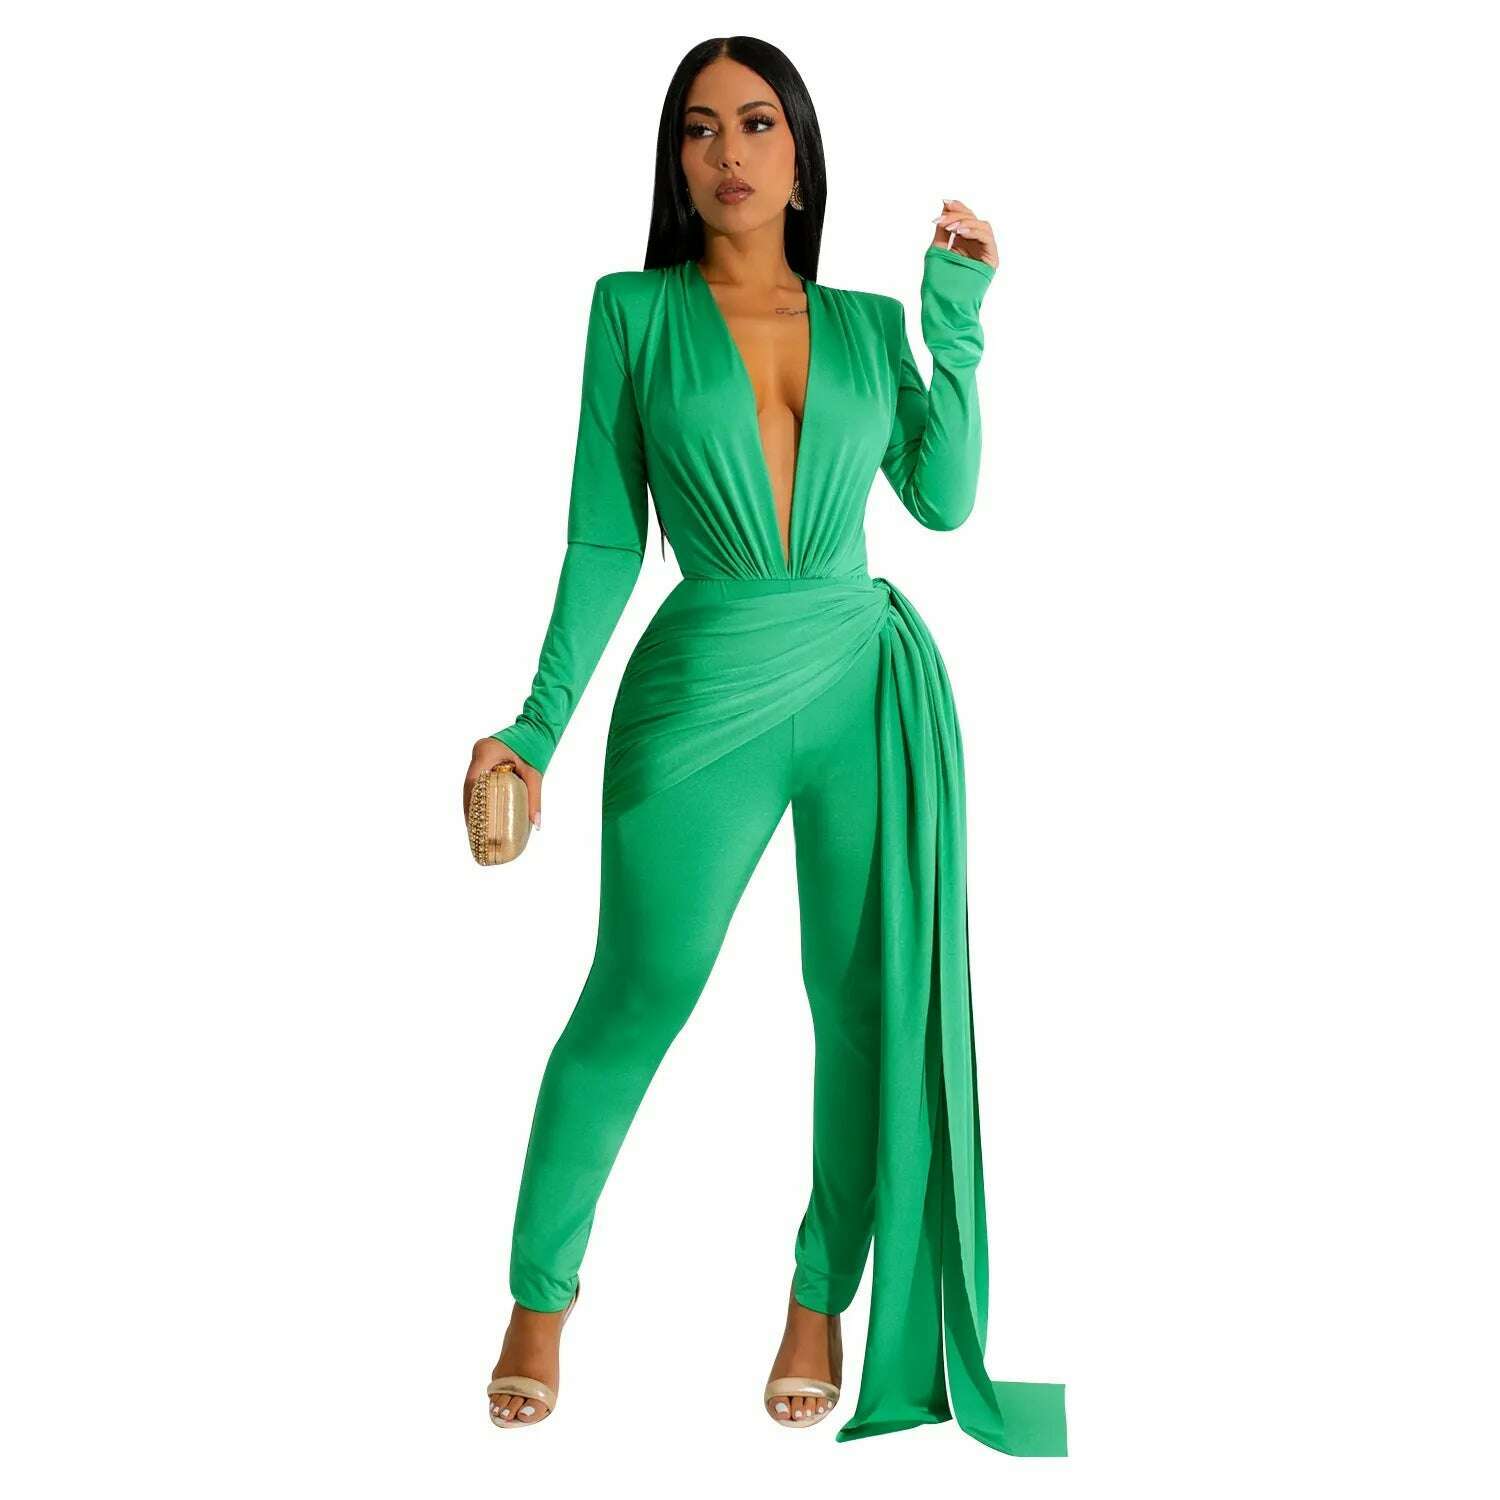 KIMLUD, Elegant Ribbon Bodycon Jumpsuits Sexy Long Sleeve Lace Up Romper Club Party Summer Women Clothes Overalls Luxury One Piece 2023, green / S, KIMLUD Womens Clothes